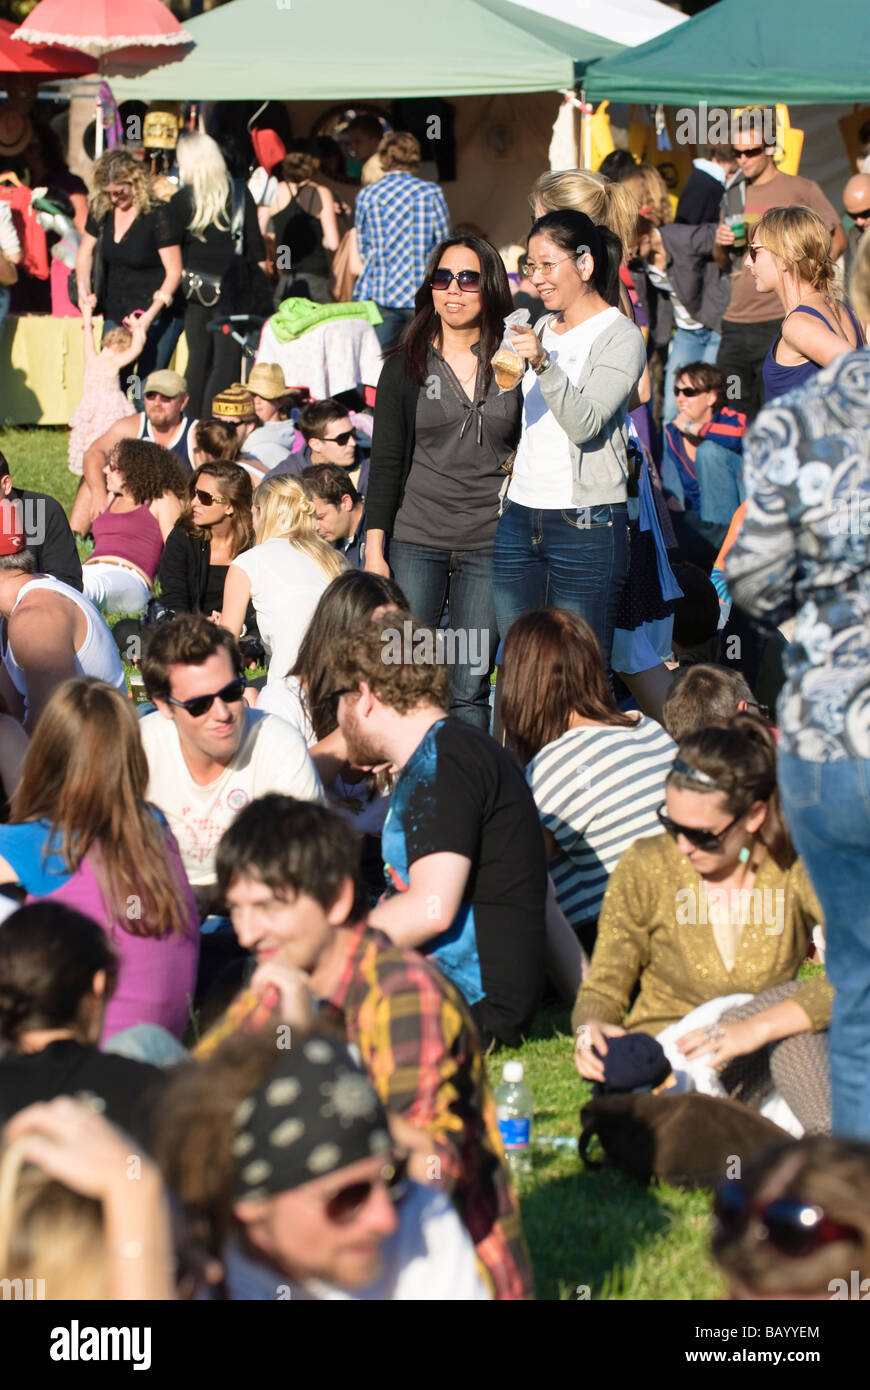 Community festivals, popular with young people, are held in city suburbs around Australia. Multicultural crowd; community festival; sociable people Stock Photo